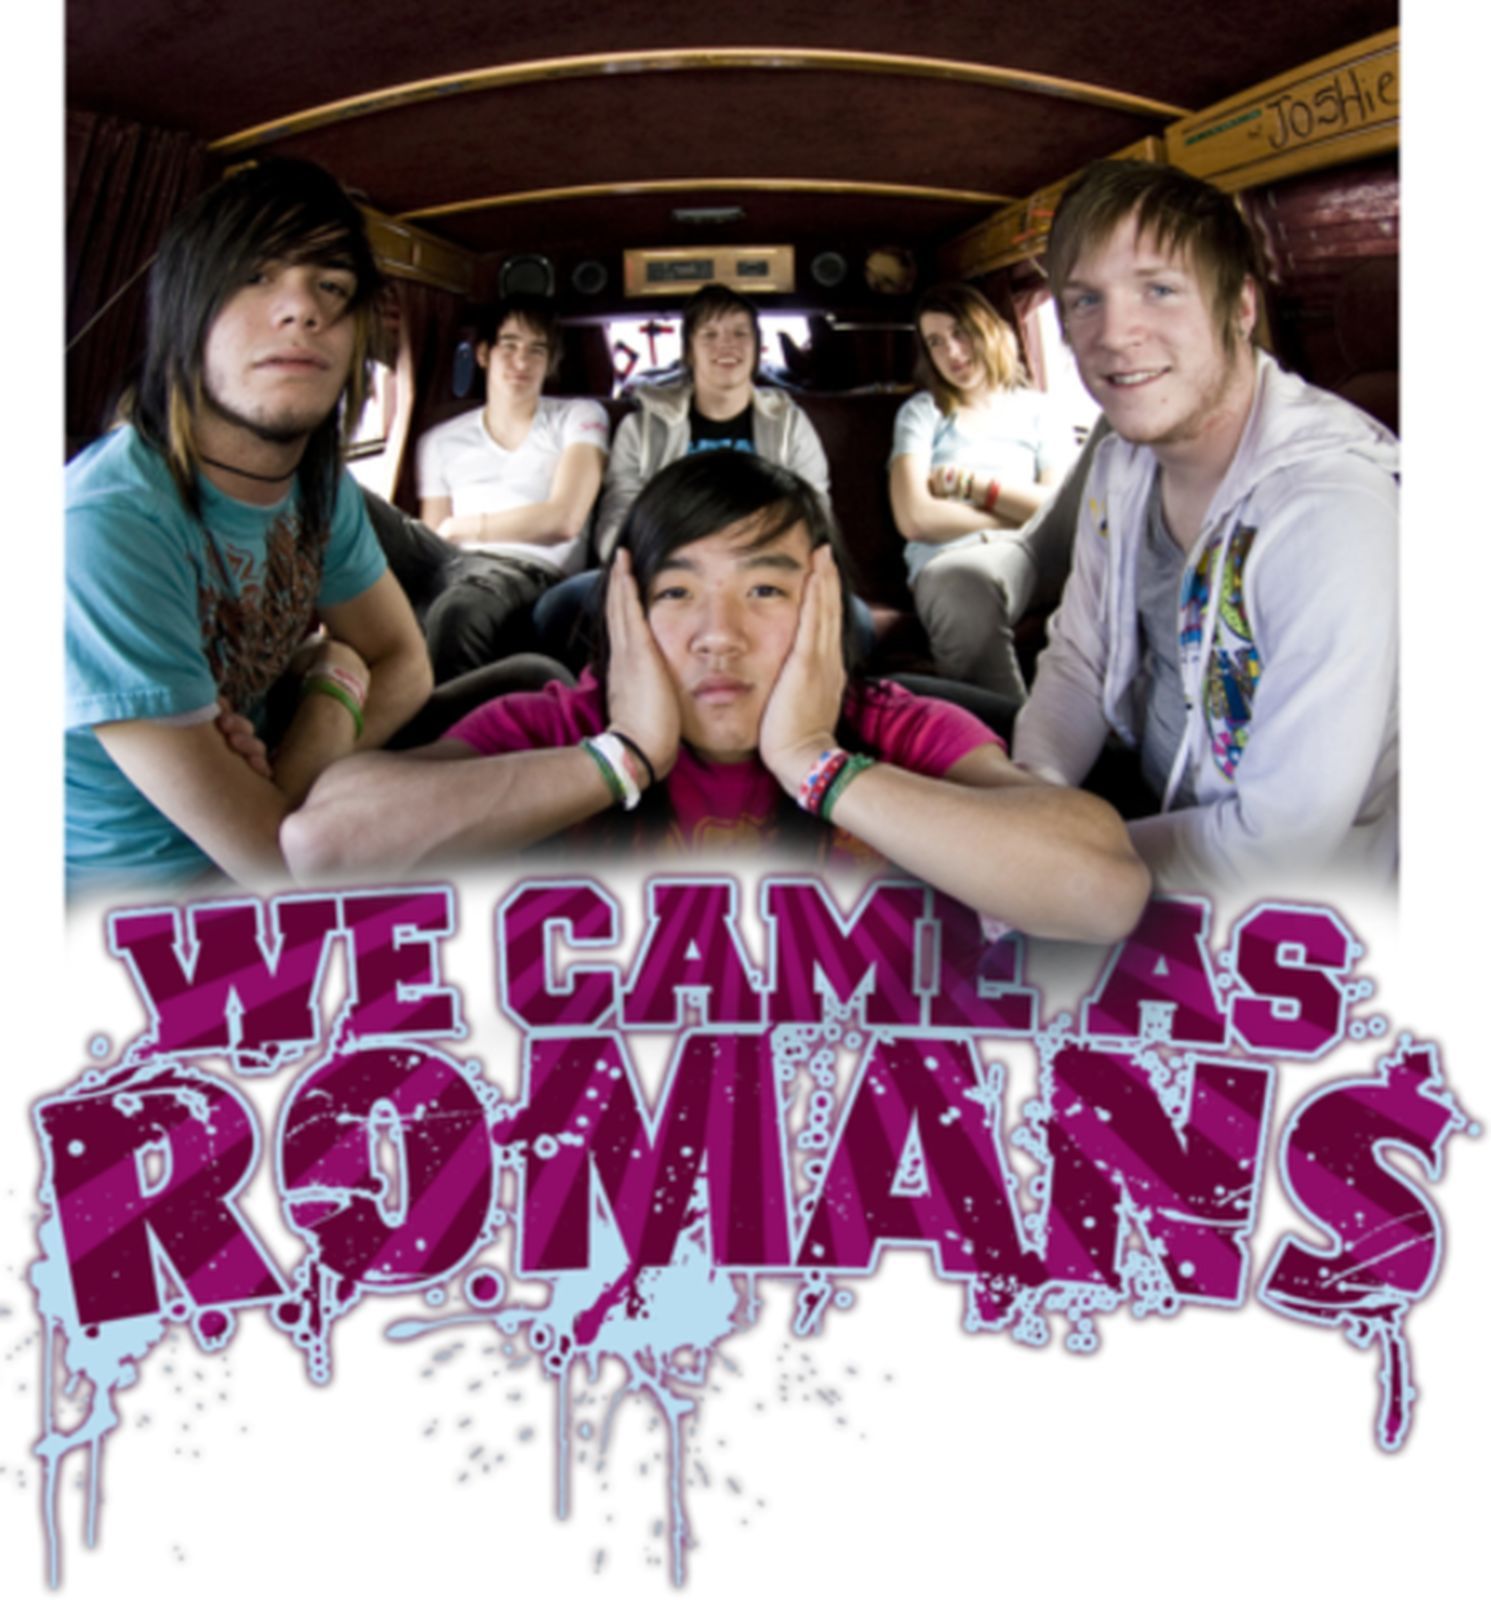 demonstrations ep we came as romans torrent